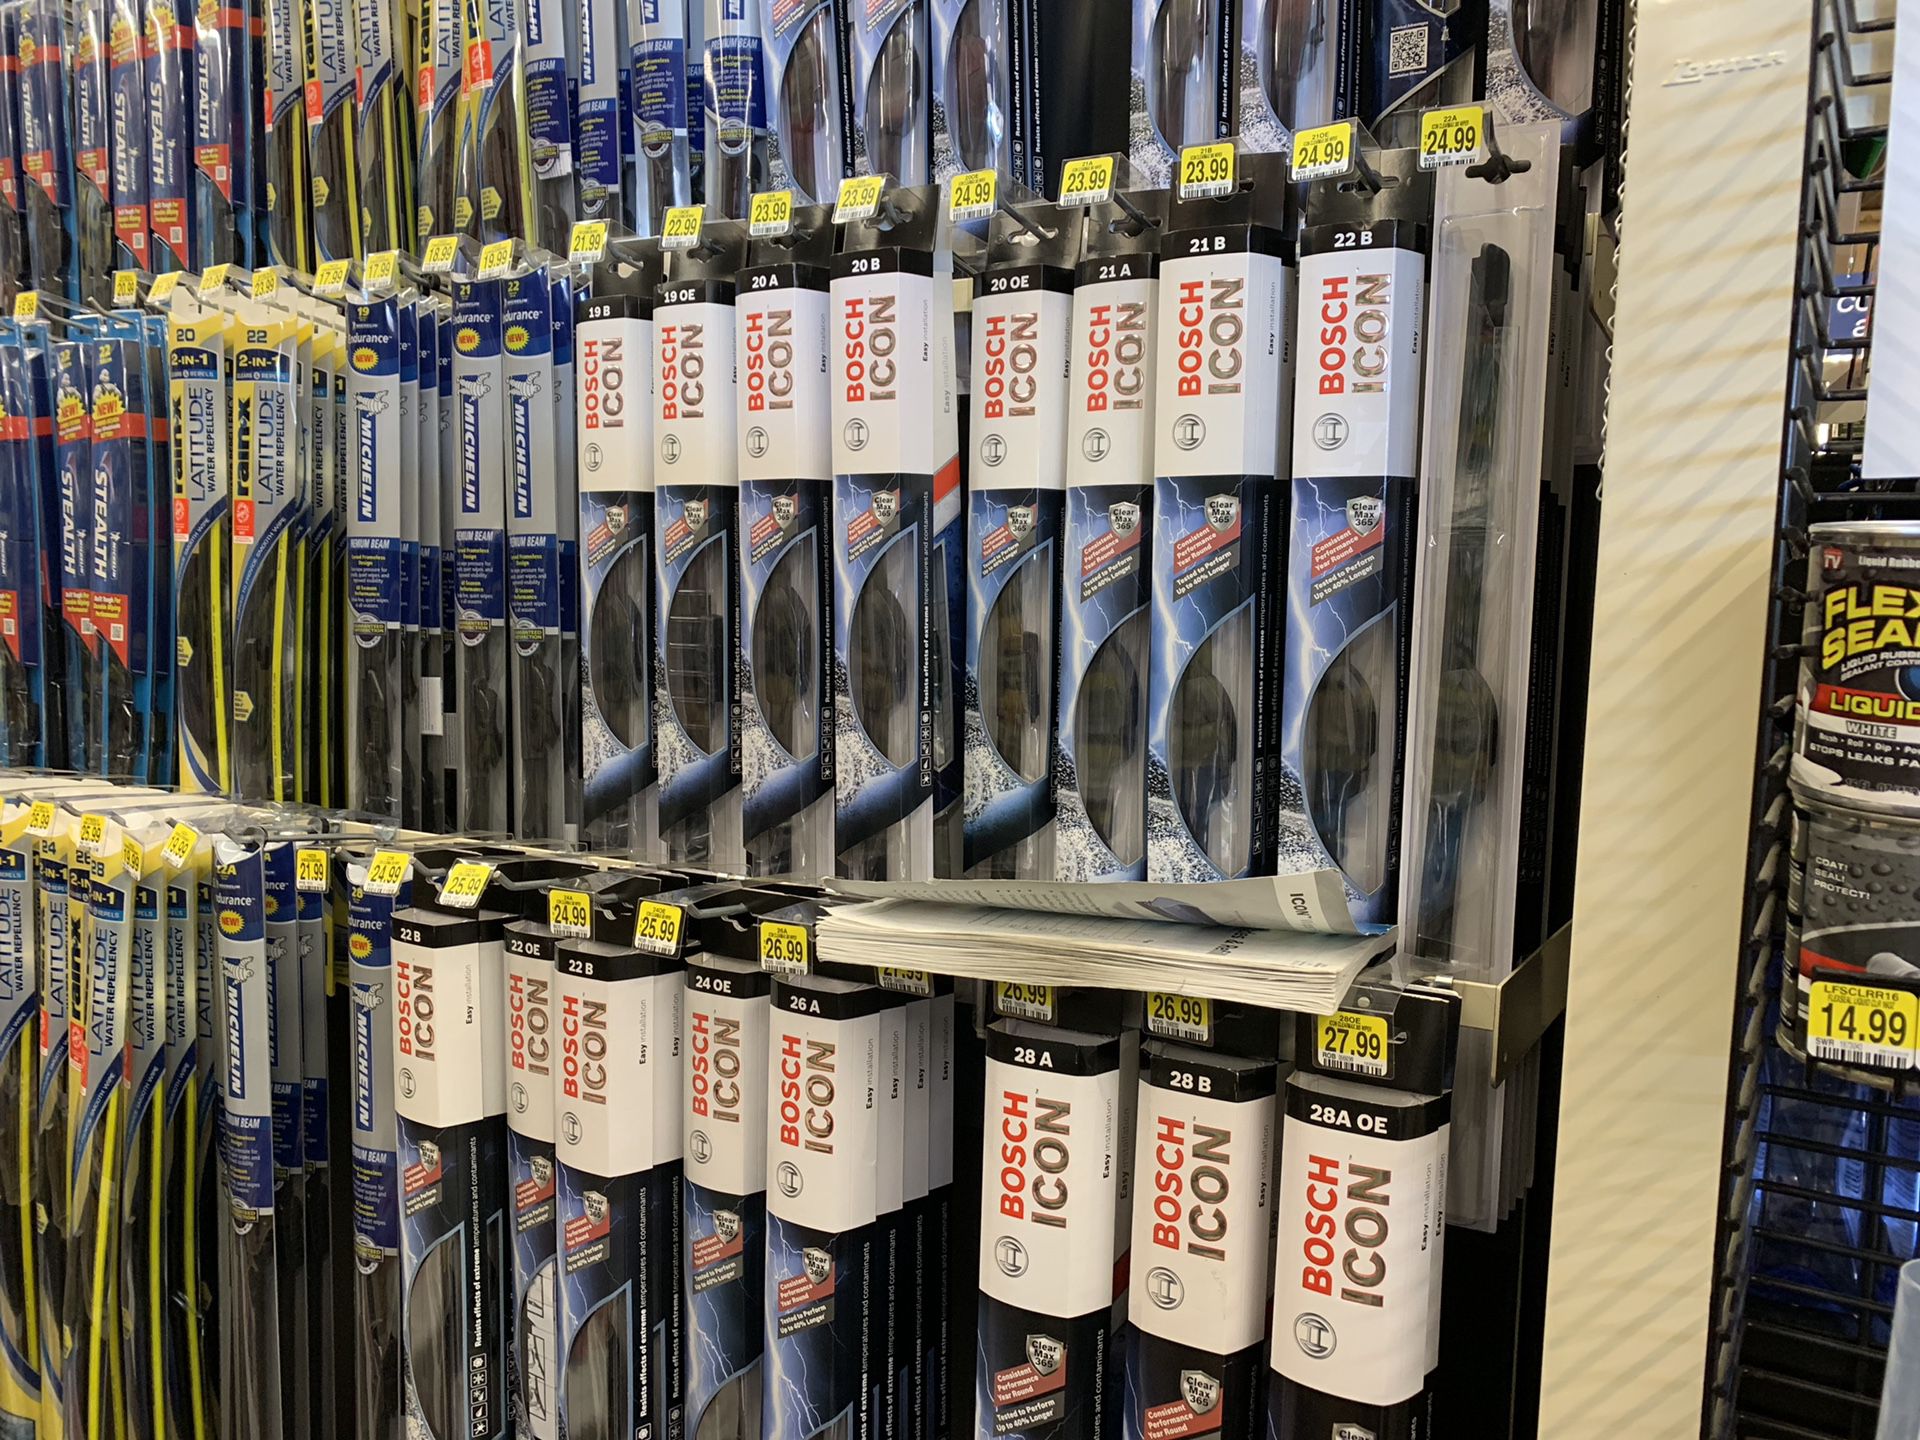 BOSCH ICON & DIRECT WIPERS* any sizes!